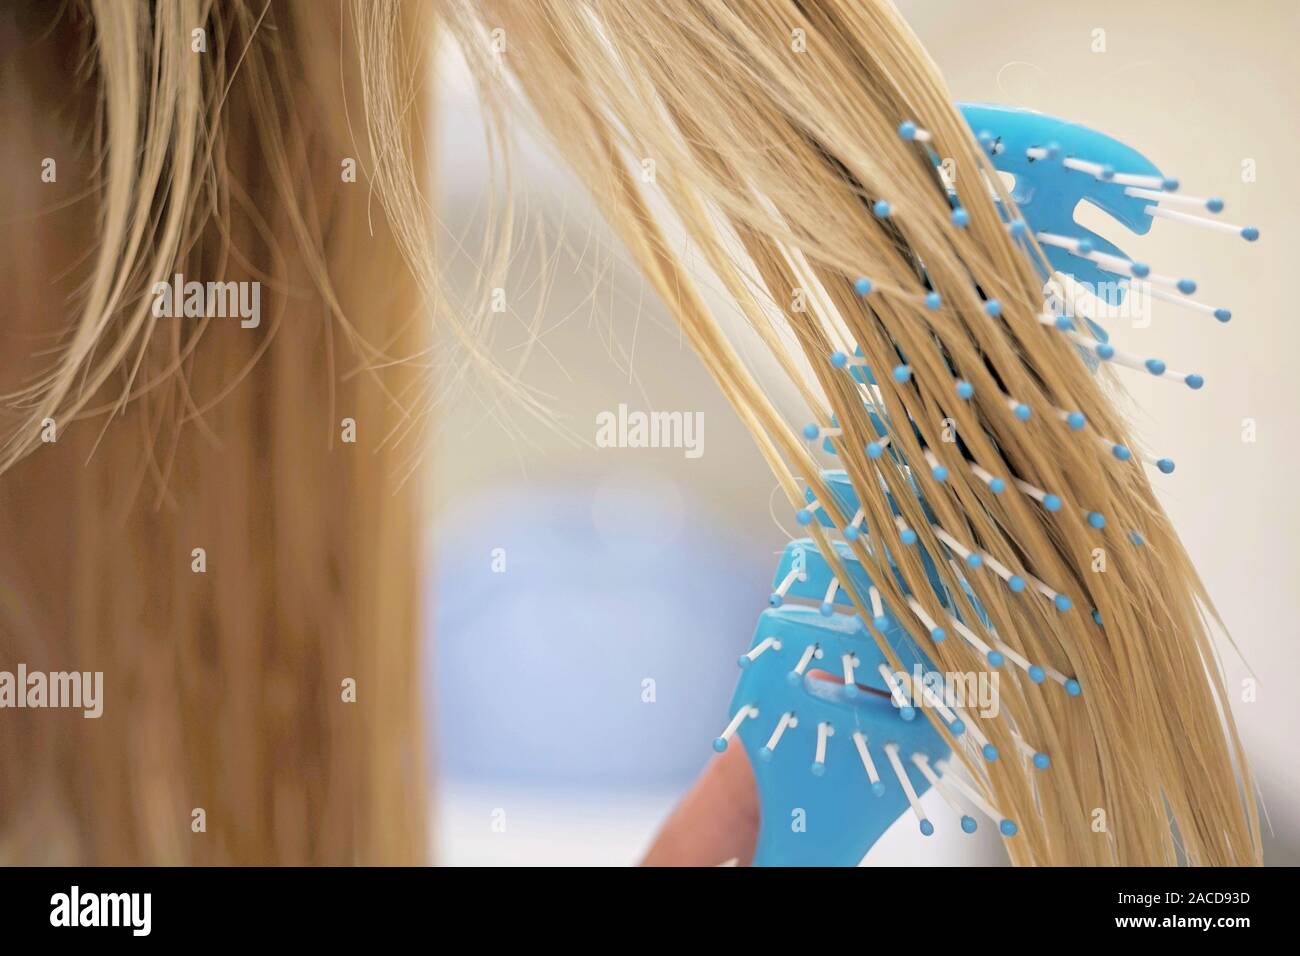 Young girl combing her wet blond hair with a blue comb. Stock Photo